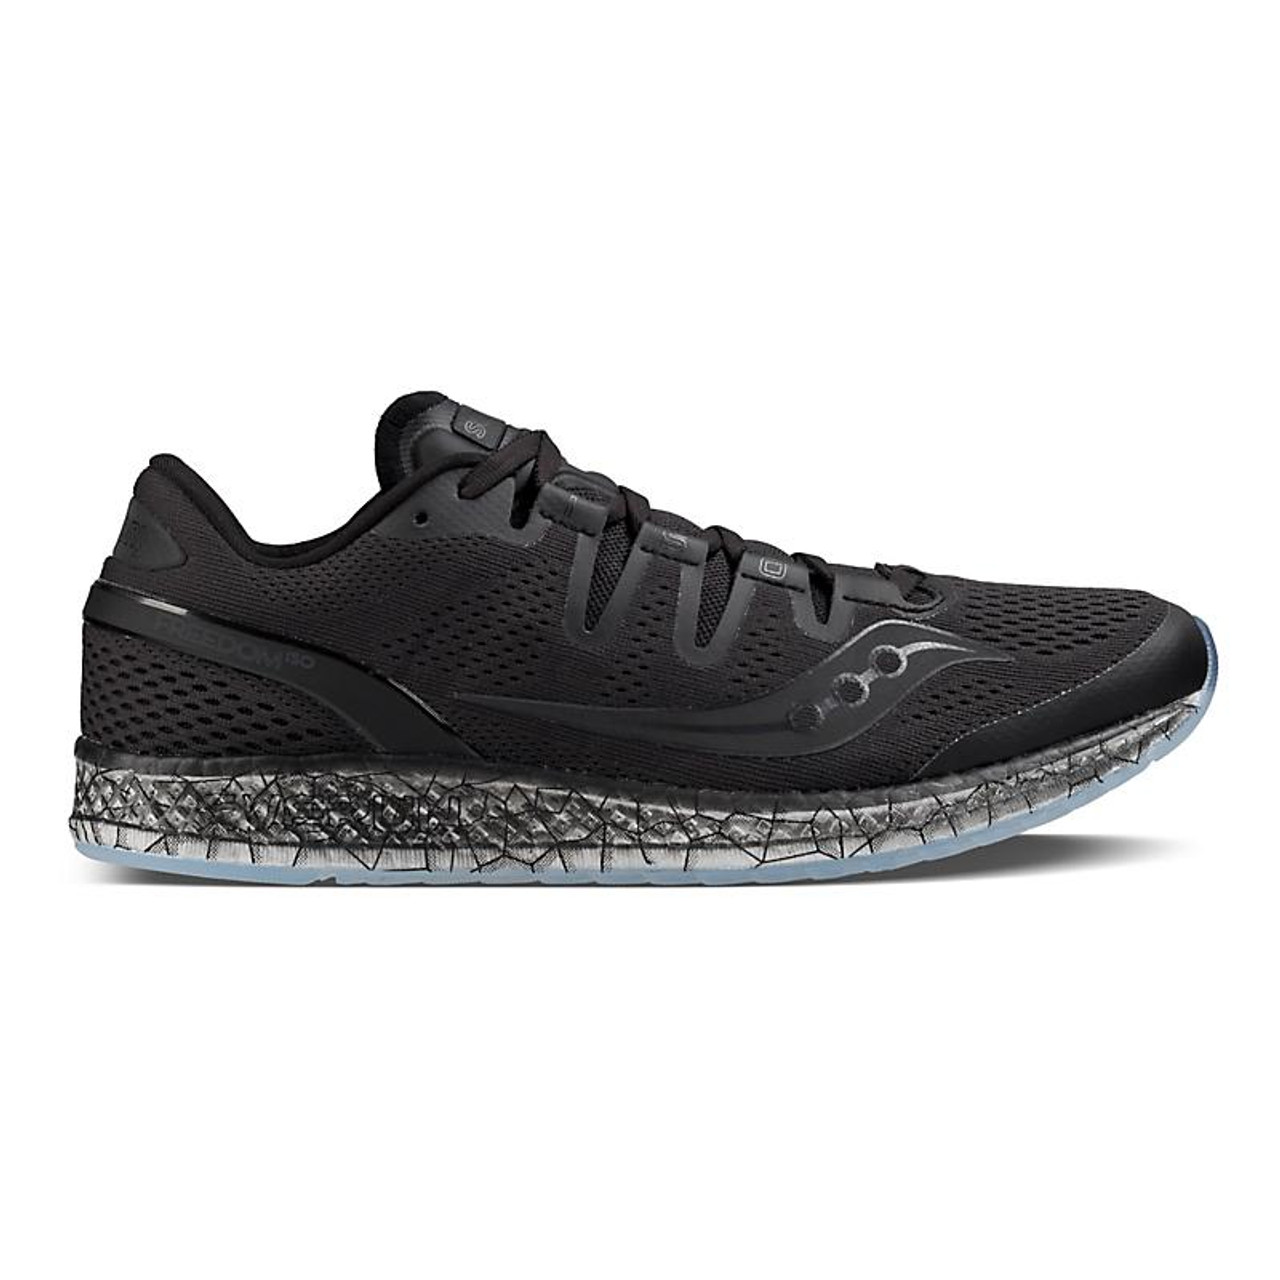 Men's Saucony Freedom ISO Running Shoe | Free Shipping